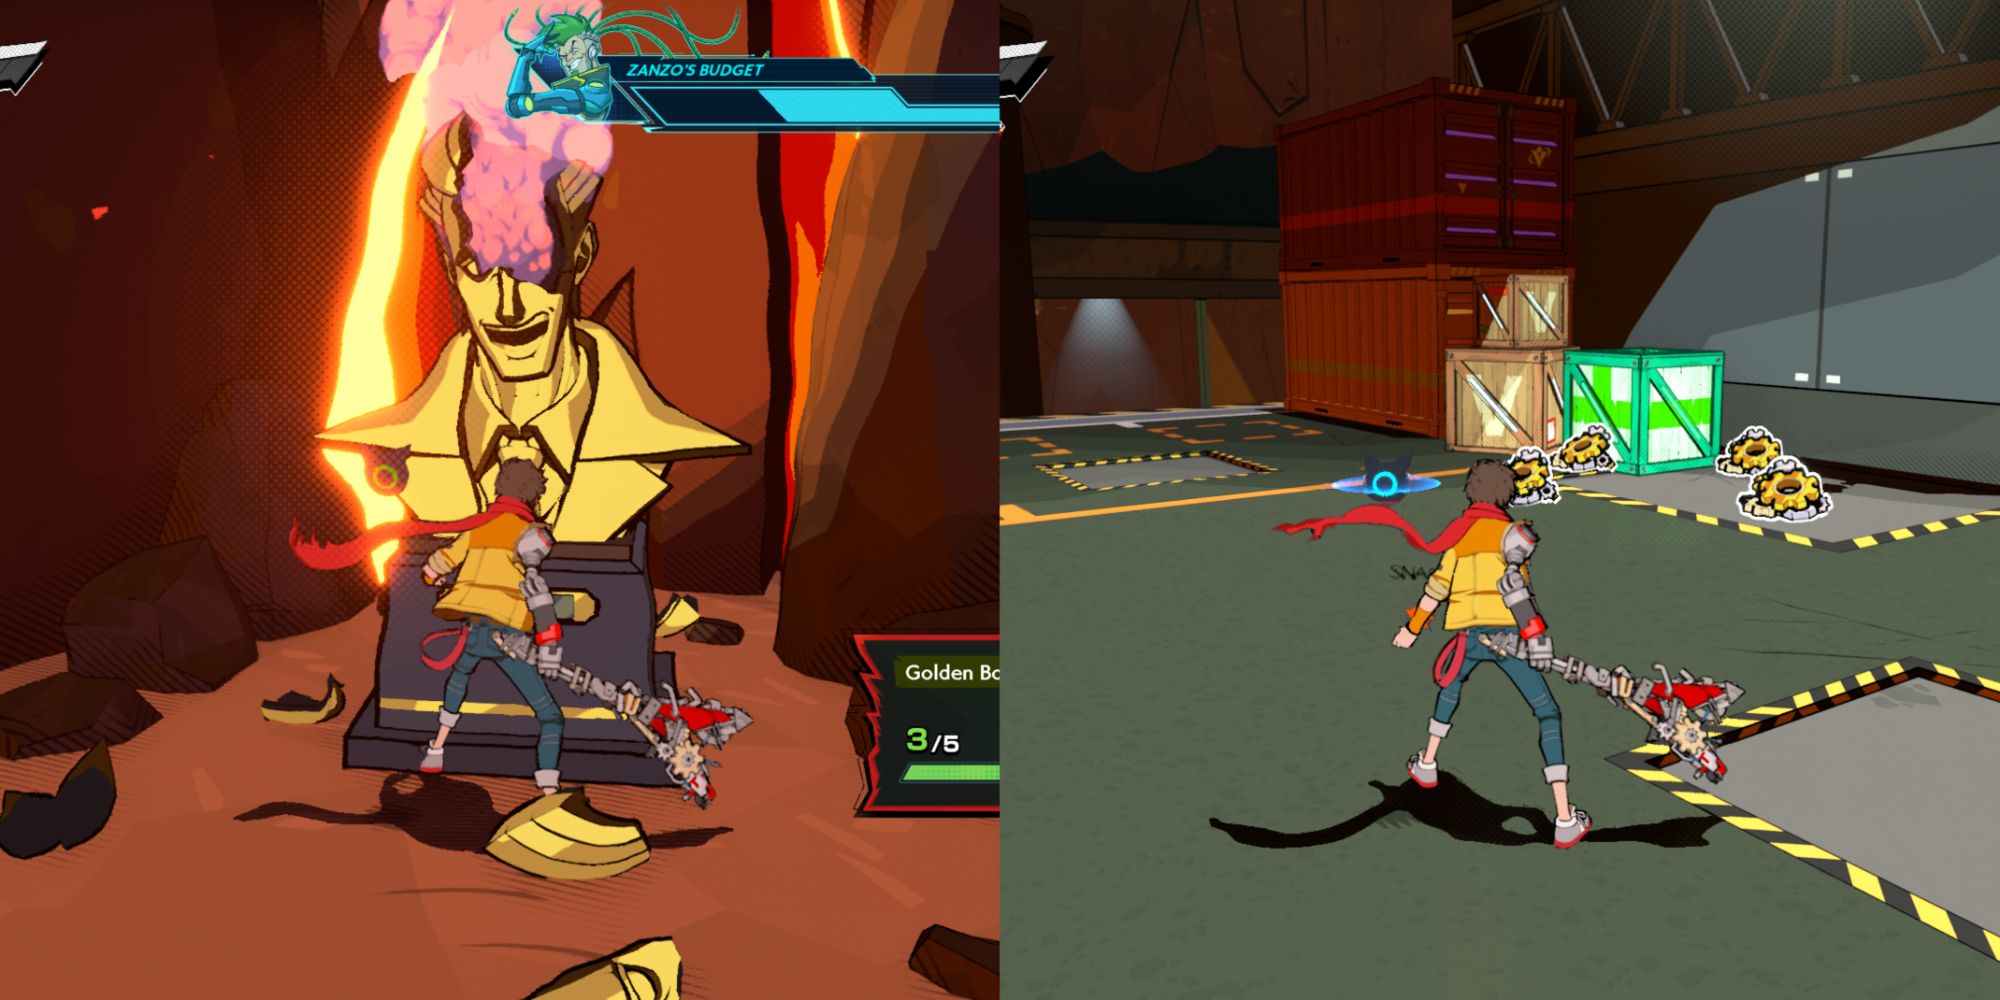 Split image showing broken golden bust on the left and brown and green crates along with gears on the ground in the right image